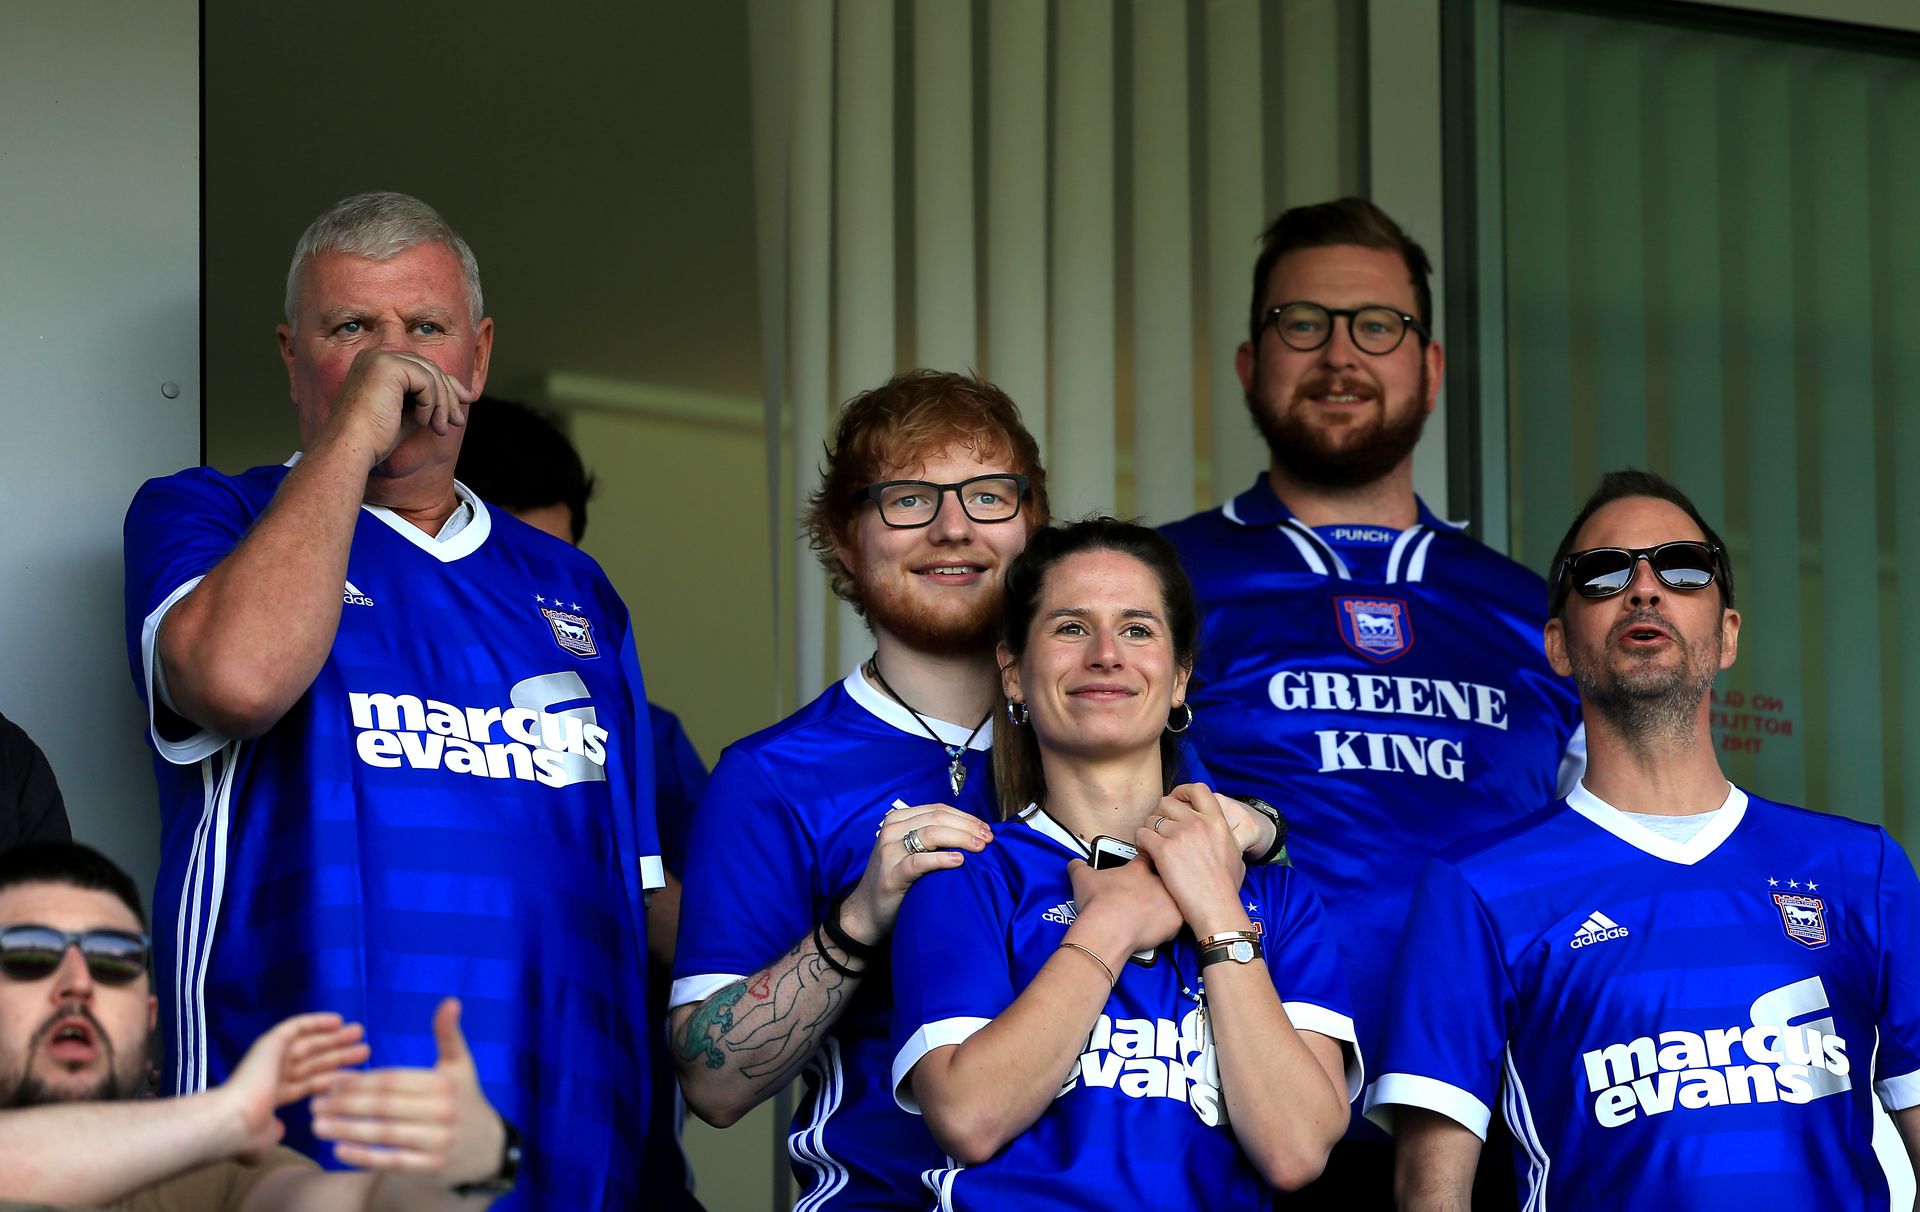 <p>                     Ed Sheeran is a big fan of Ipswich Town, having grown up in nearby Framlingham, and the singer is a regular at Portman Road.                   </p>                                      <p>                     Sheeran has sponsored the Tractor Boys for several seasons and is an honorary member of the squad, with the number 17 reserved for him. In a break from his US tour, the singer pulled pints for fans in the pub and celebrated in the dressing room with players after a 3-0 win over Hull City in October 2023.                   </p>